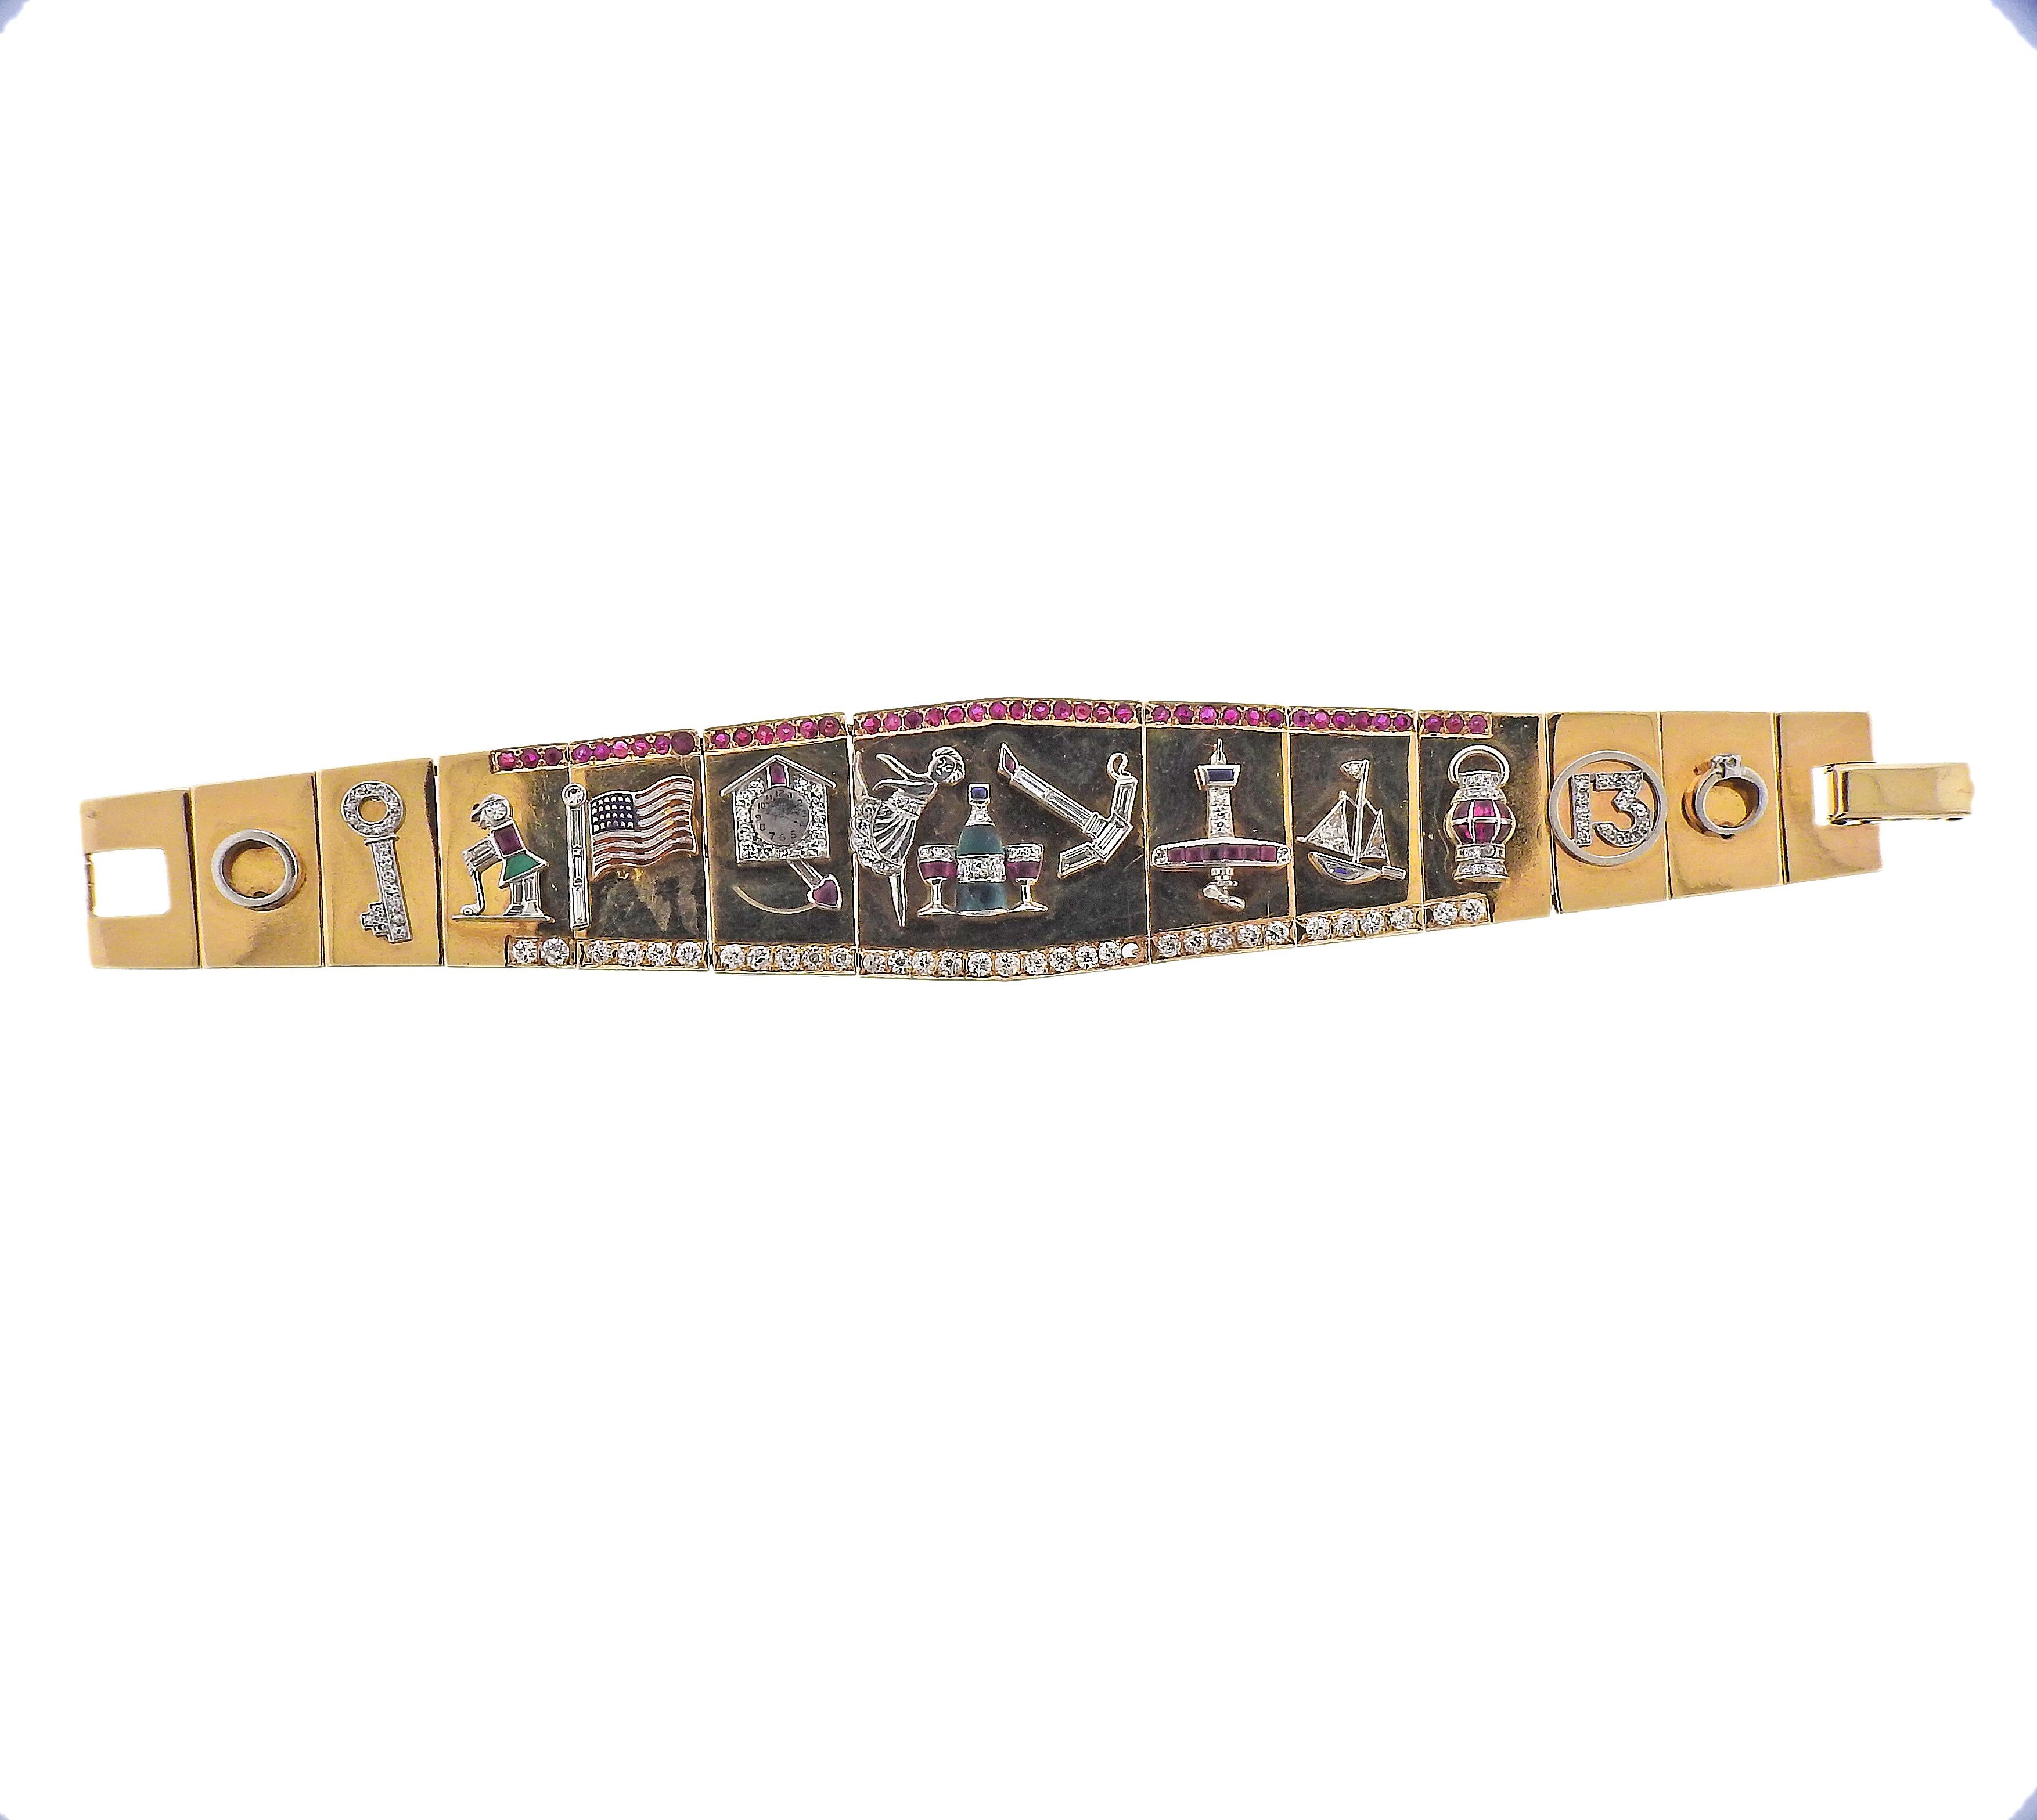 One of a kind 14k gold bracelet with applied charms, set in gold and platinum, adorned with rubies, sapphire and green gems (multiple stones are abraded and have chips) surrounded with approx. 2.00-2.20ctw in diamonds (one is missing). Bracelet is